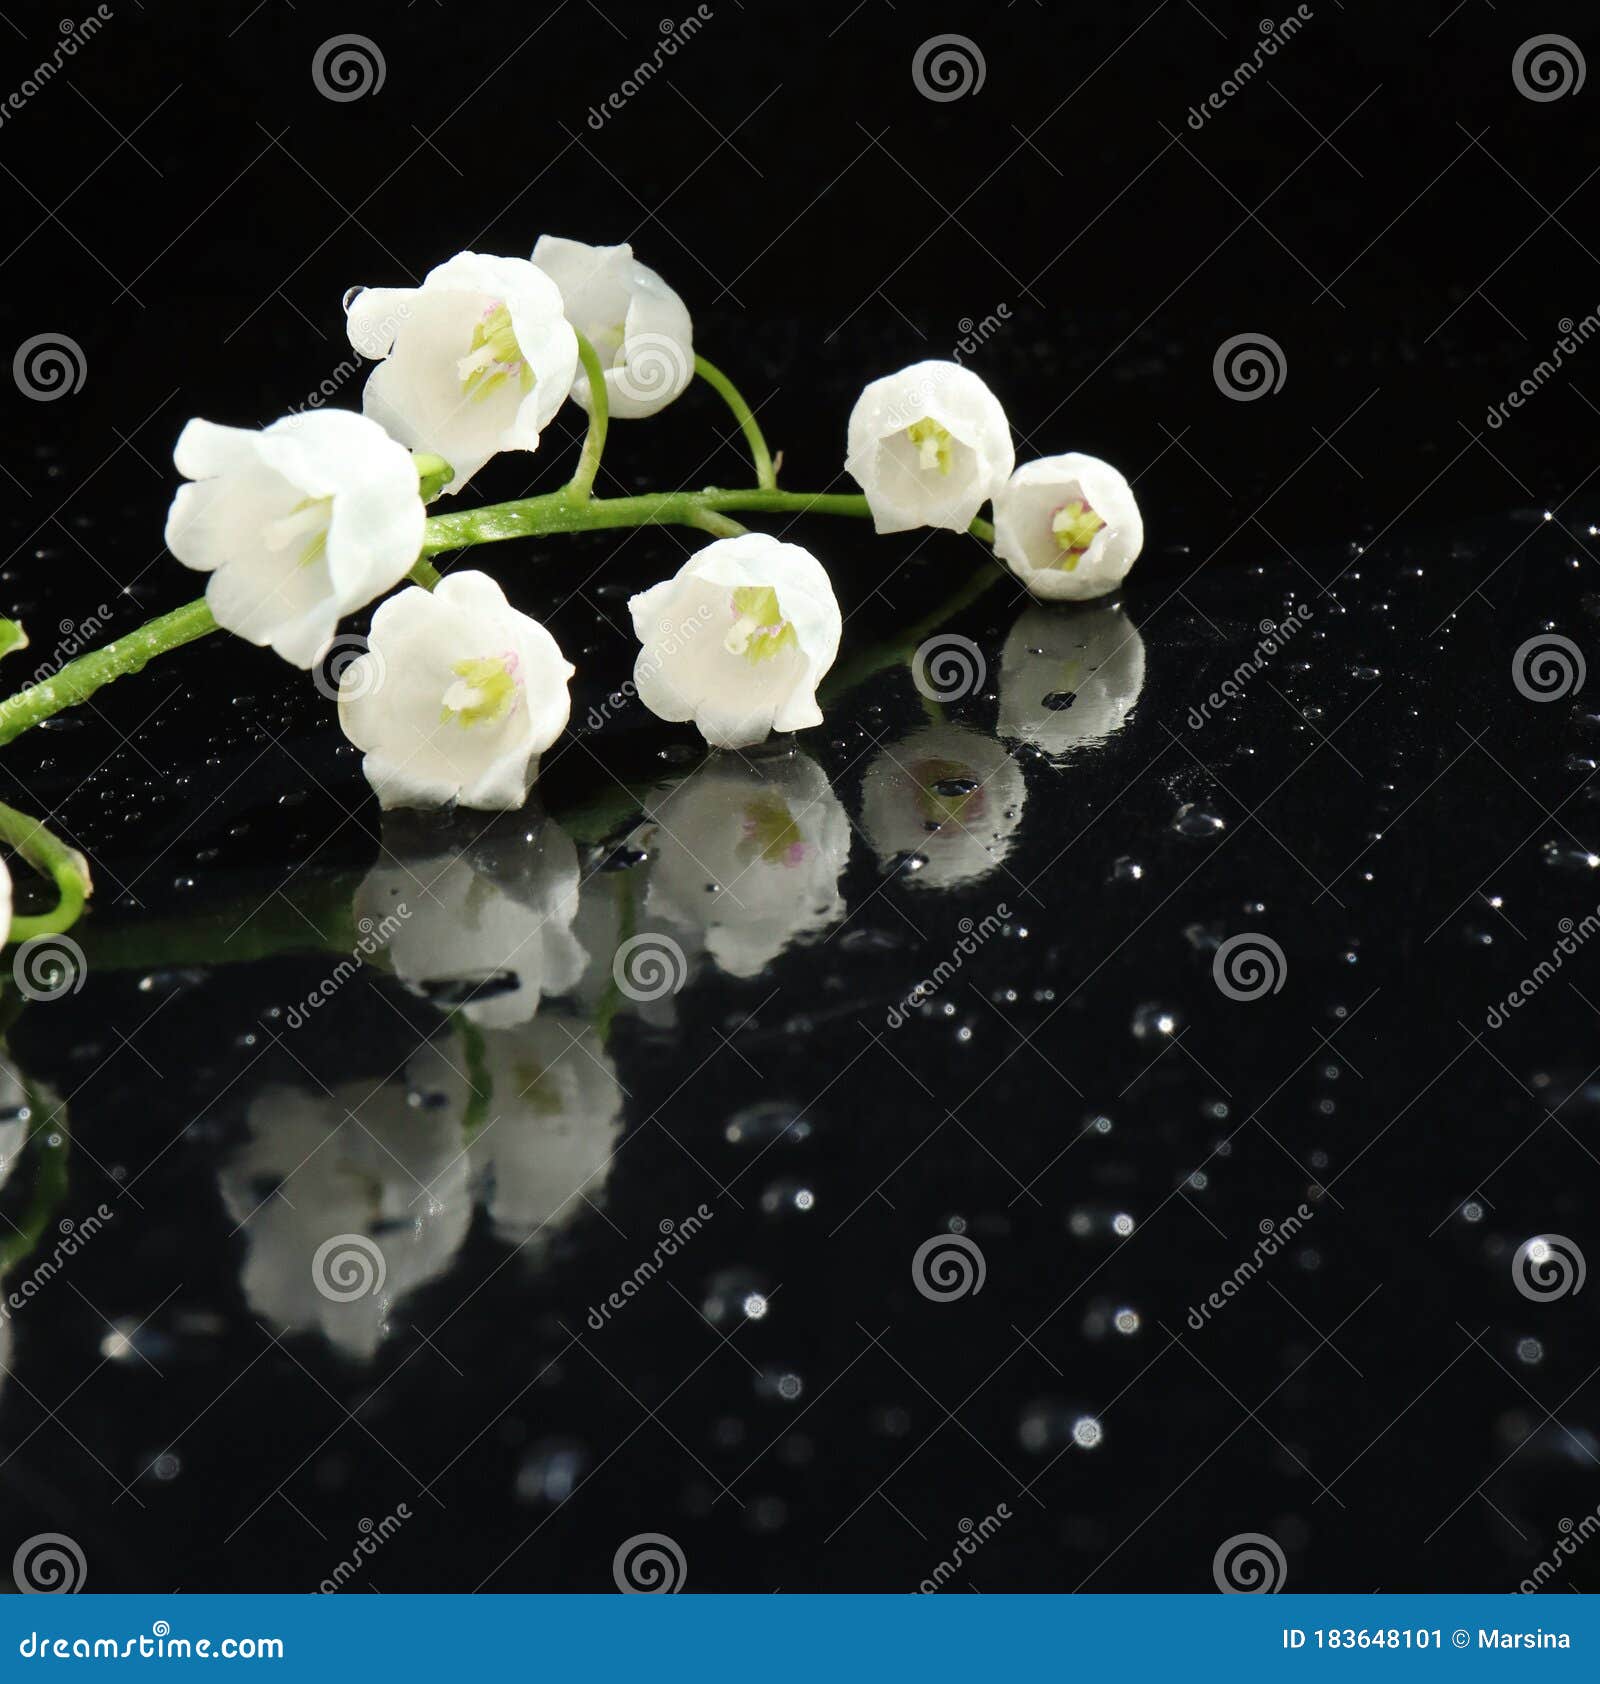 Stylish Black Background With Lily Of The Valley Water Drops And Empty Space Stock Image Image Of Stylish Convallaria 183648101